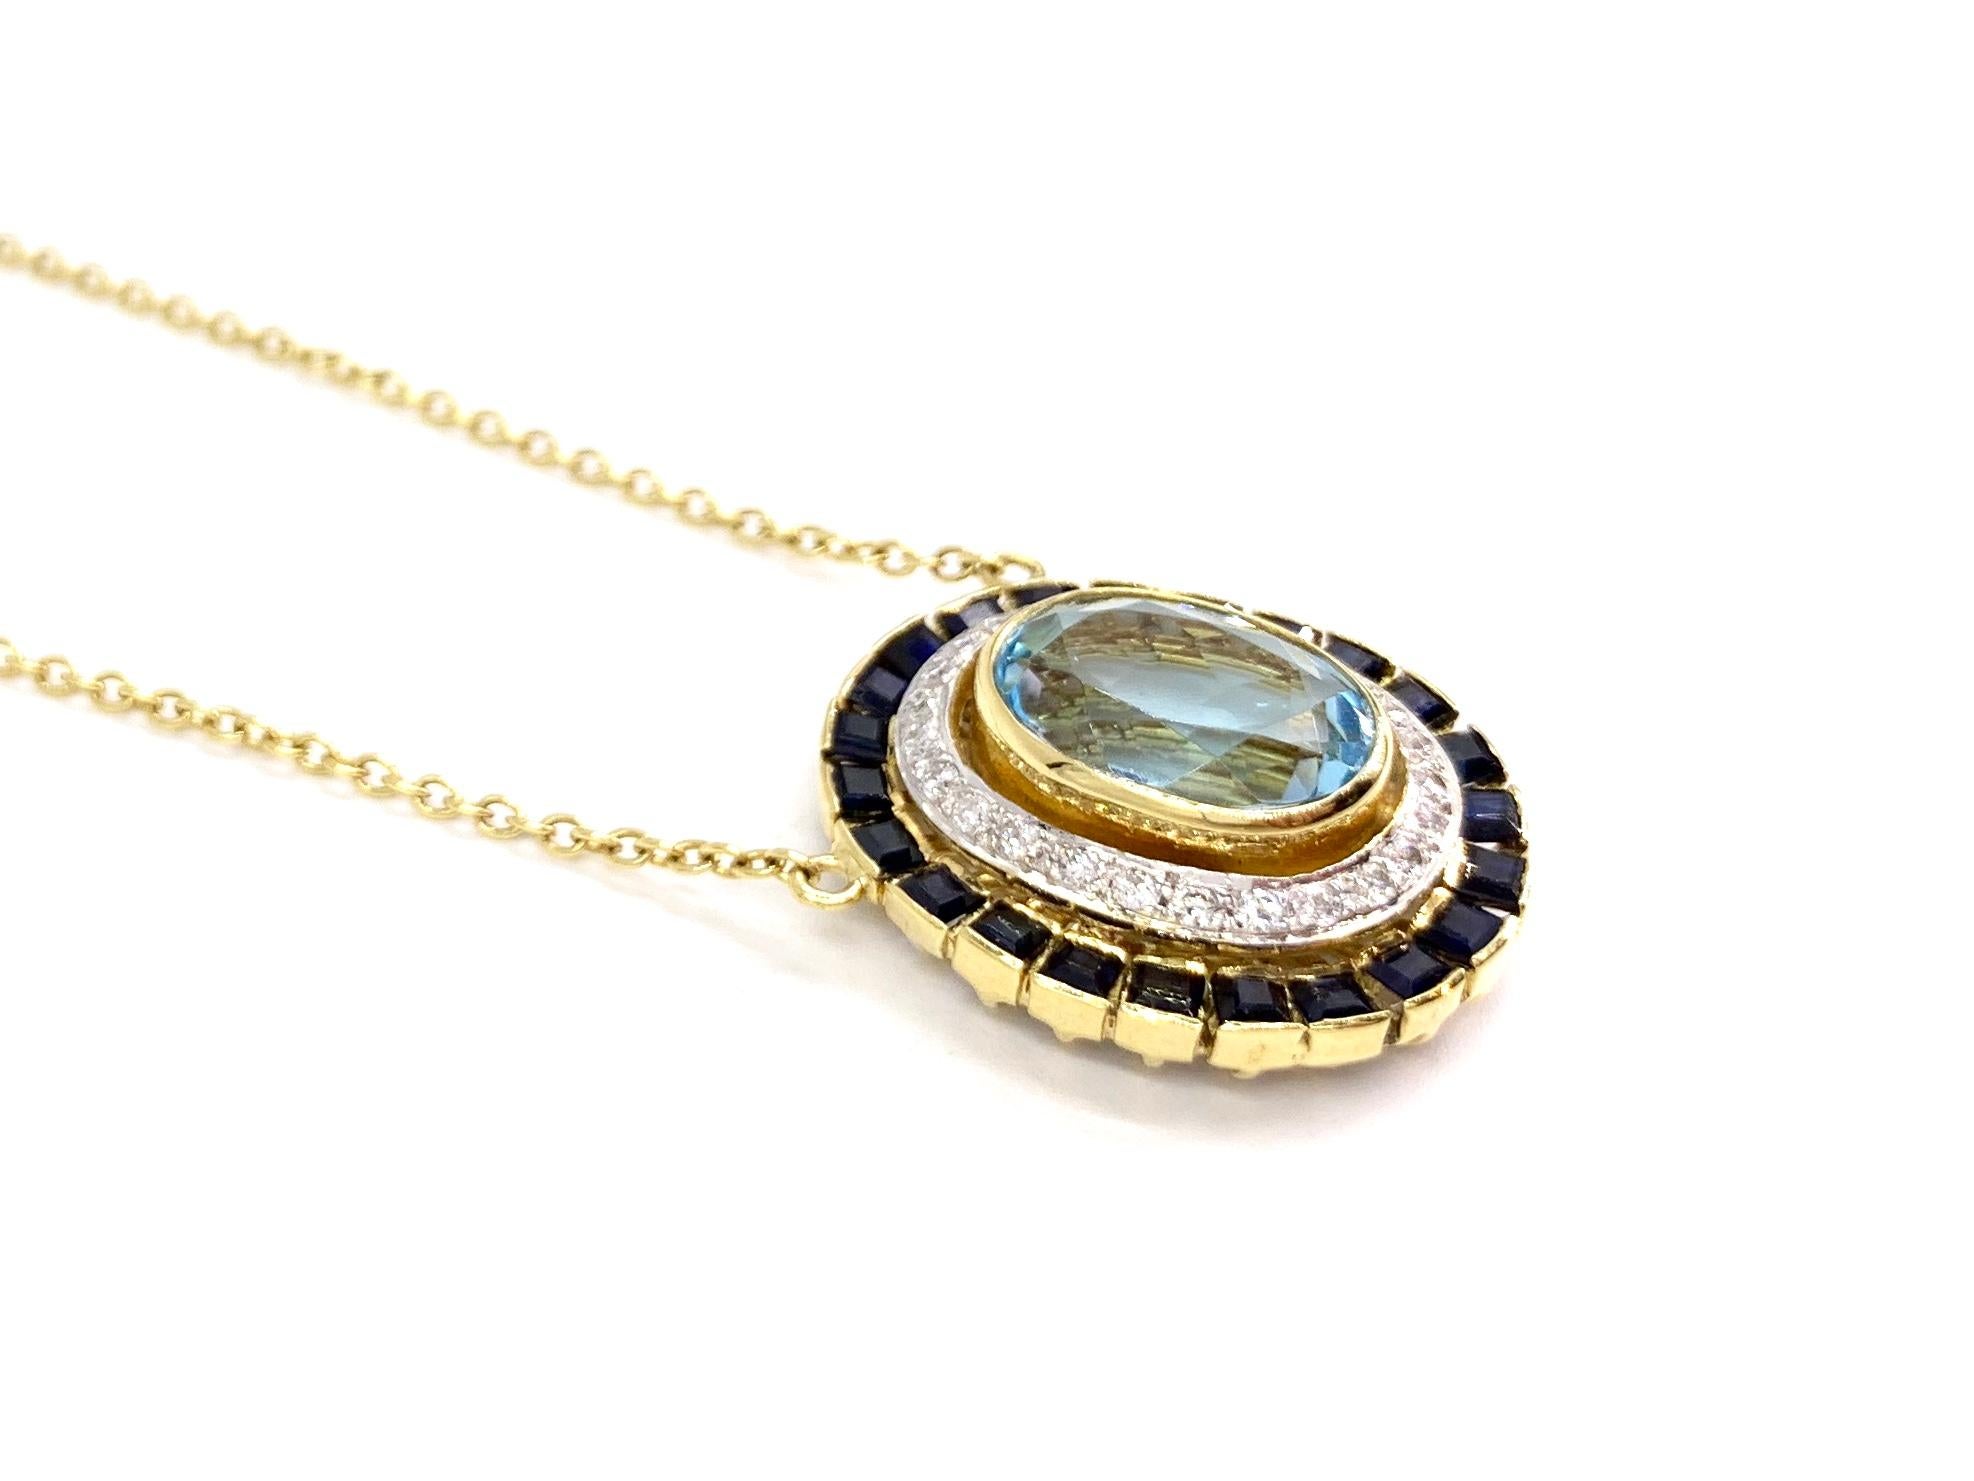 A fashionable 18 karat yellow gold stationary pendant necklace featuring a faceted oval sky blue topaz gemstone surrounded by approximately .26 carats of white diamonds and 2.50 carats of princess cut dark blue sapphires. Diamond quality is